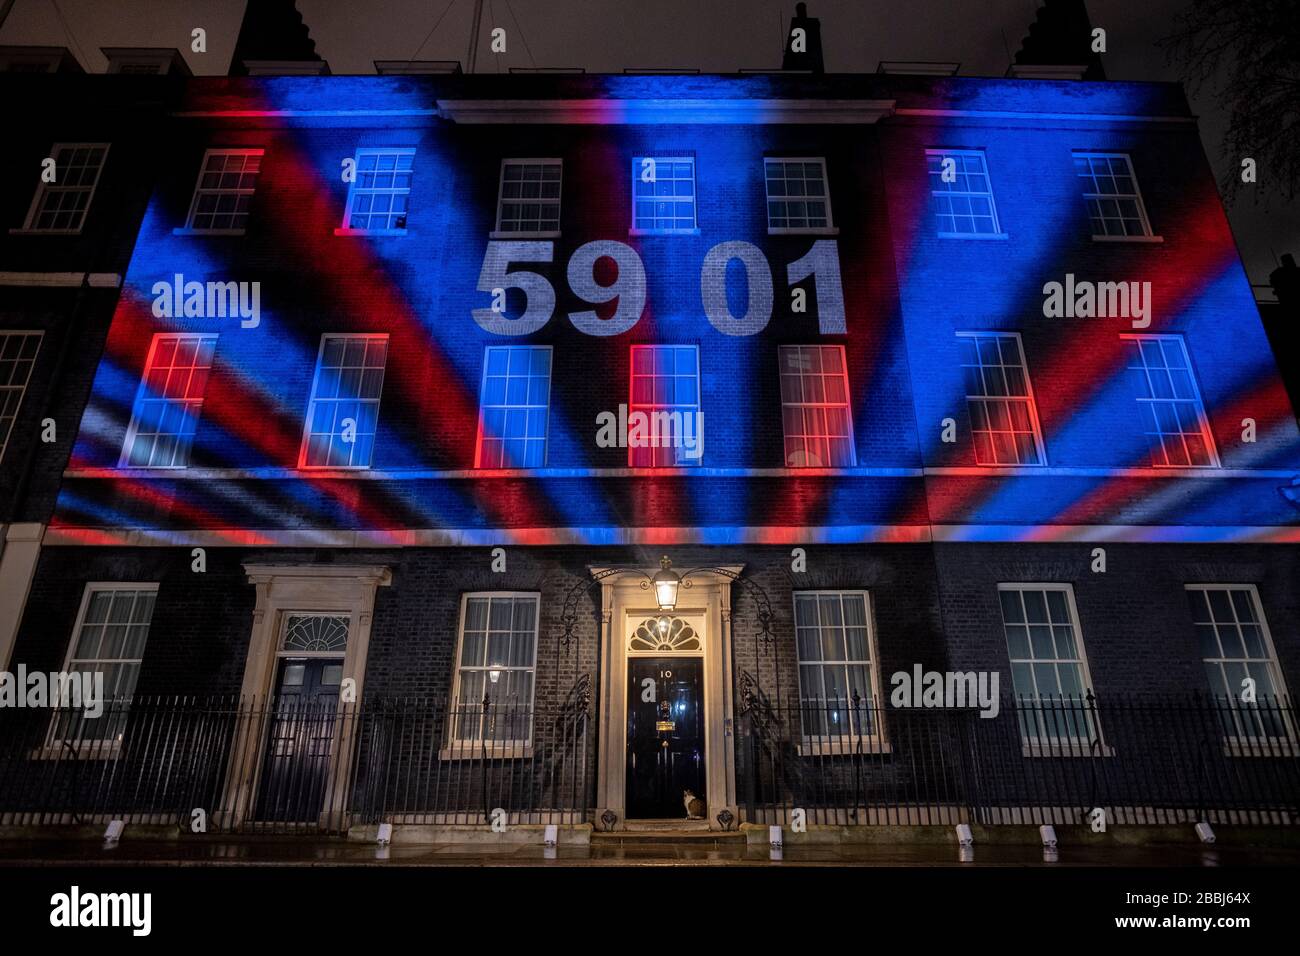 Brexit eve 31st of January 2020.  Pro Brexit supporters celebrate the final hours of being in the EU as the clock counts down to the United Kingdom leaving the European Union.  Pictured, the exterior of No 10 Downing St is lite up with a count down clock and light show.          by Gavin Crilly Photography, NO SALES, NO SYNDICATION contact for more information mob: 07810638169 web: www.pressphotographergloucestershire.co.uk email: gavincrilly@gmail.com    The photographic copyright (© 2015) is exclusively retained by the works creator at all times and sales, syndication or offering the work fo Stock Photo